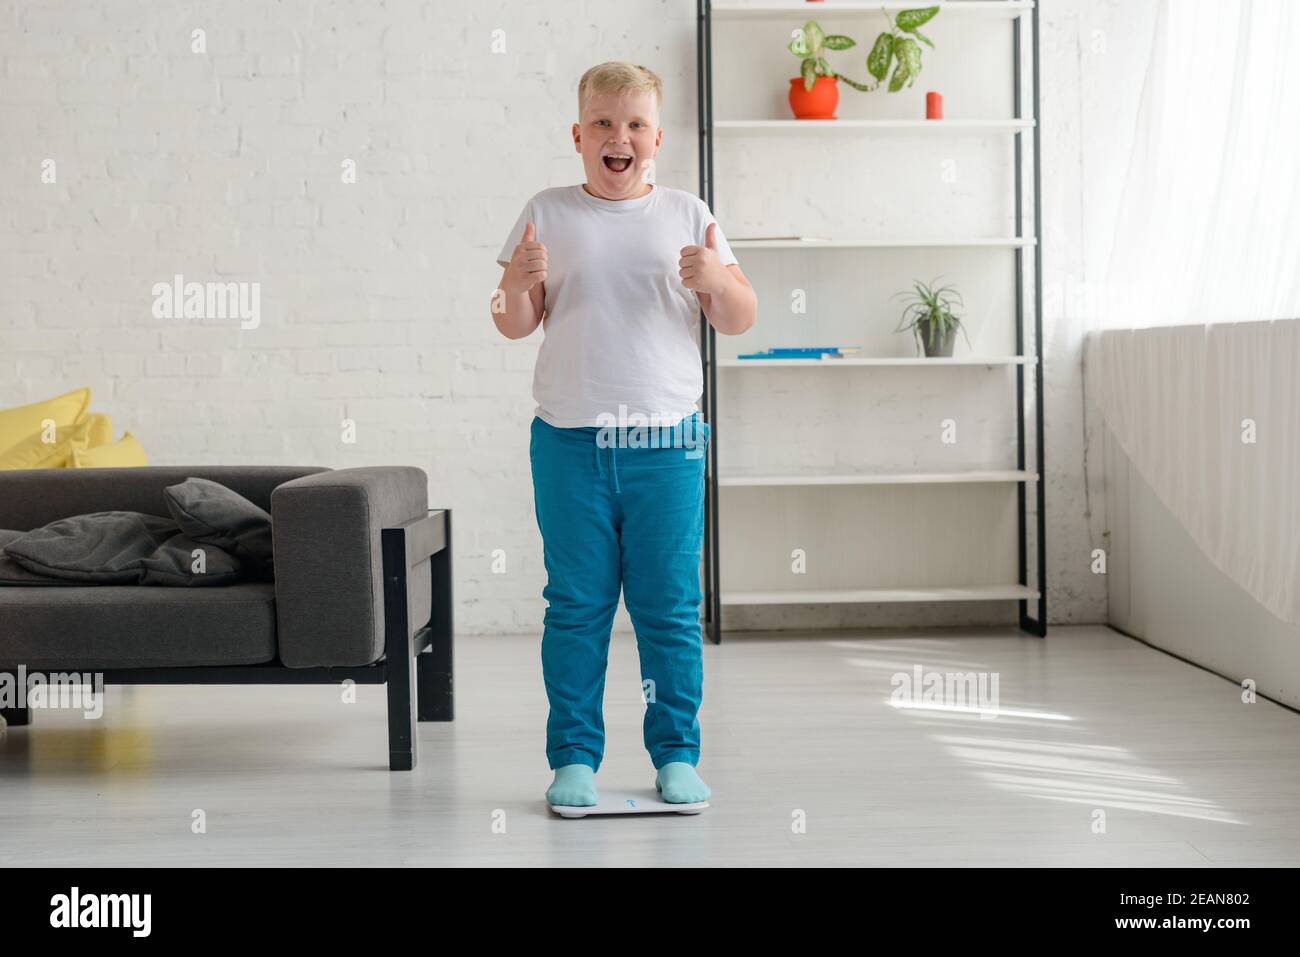 Happy overweight boy after weighing. Cheerful kid showing thumbs up Stock Photo